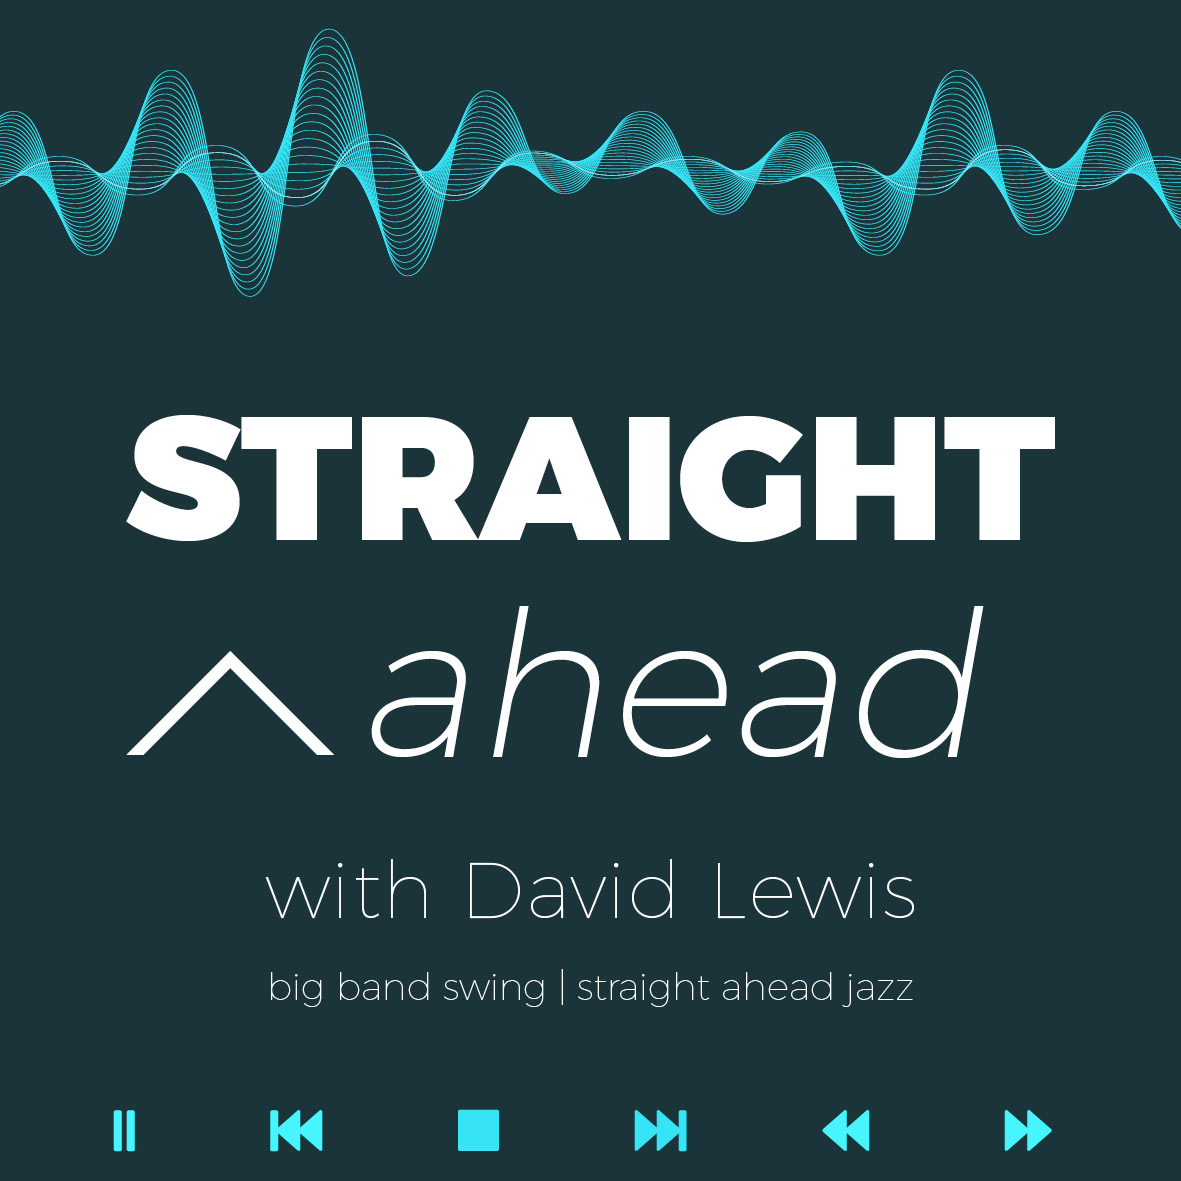 Straight Ahead on Solar Radio with David Lewis Wednesday 16th May April 2018